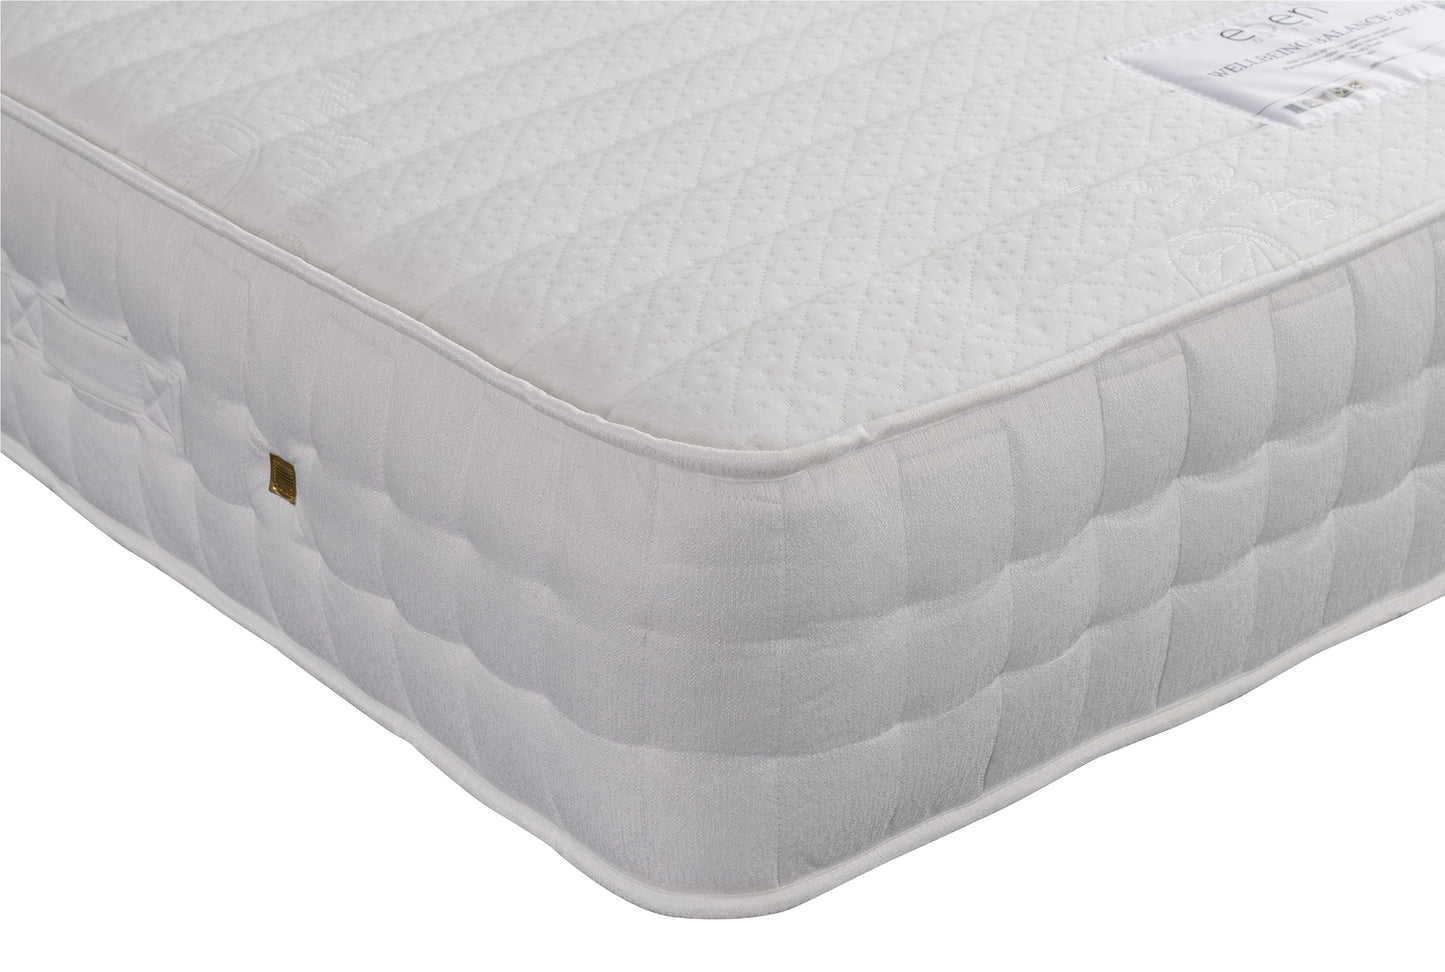 Sweet Dreams Balance mattress. Fast delivery available.